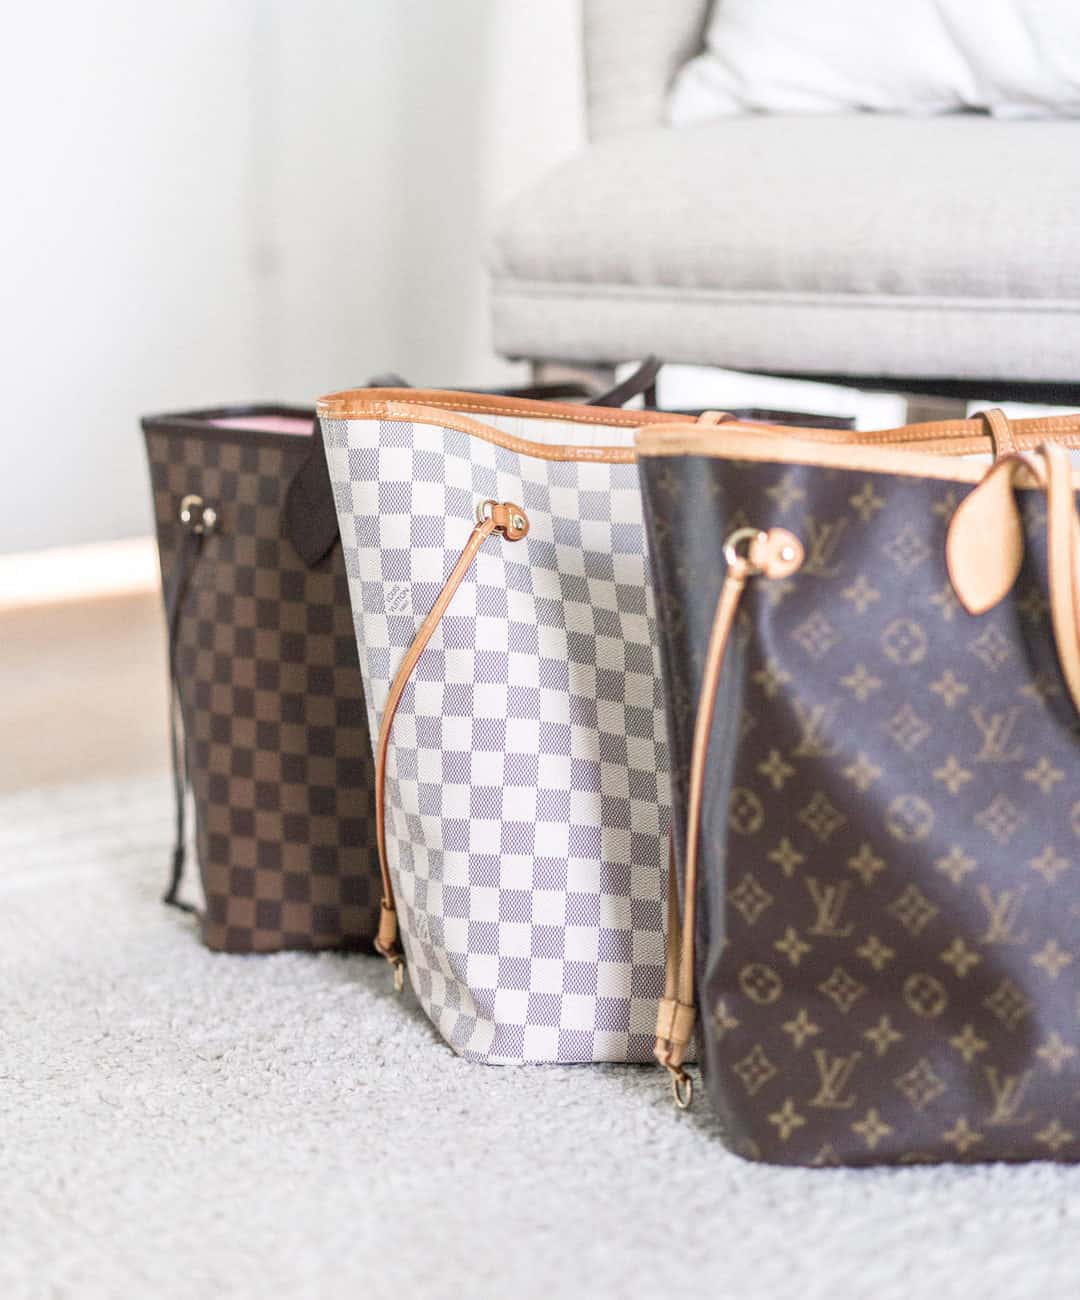 Discontinued (But Not Forgotten) Louis Vuitton - Academy by